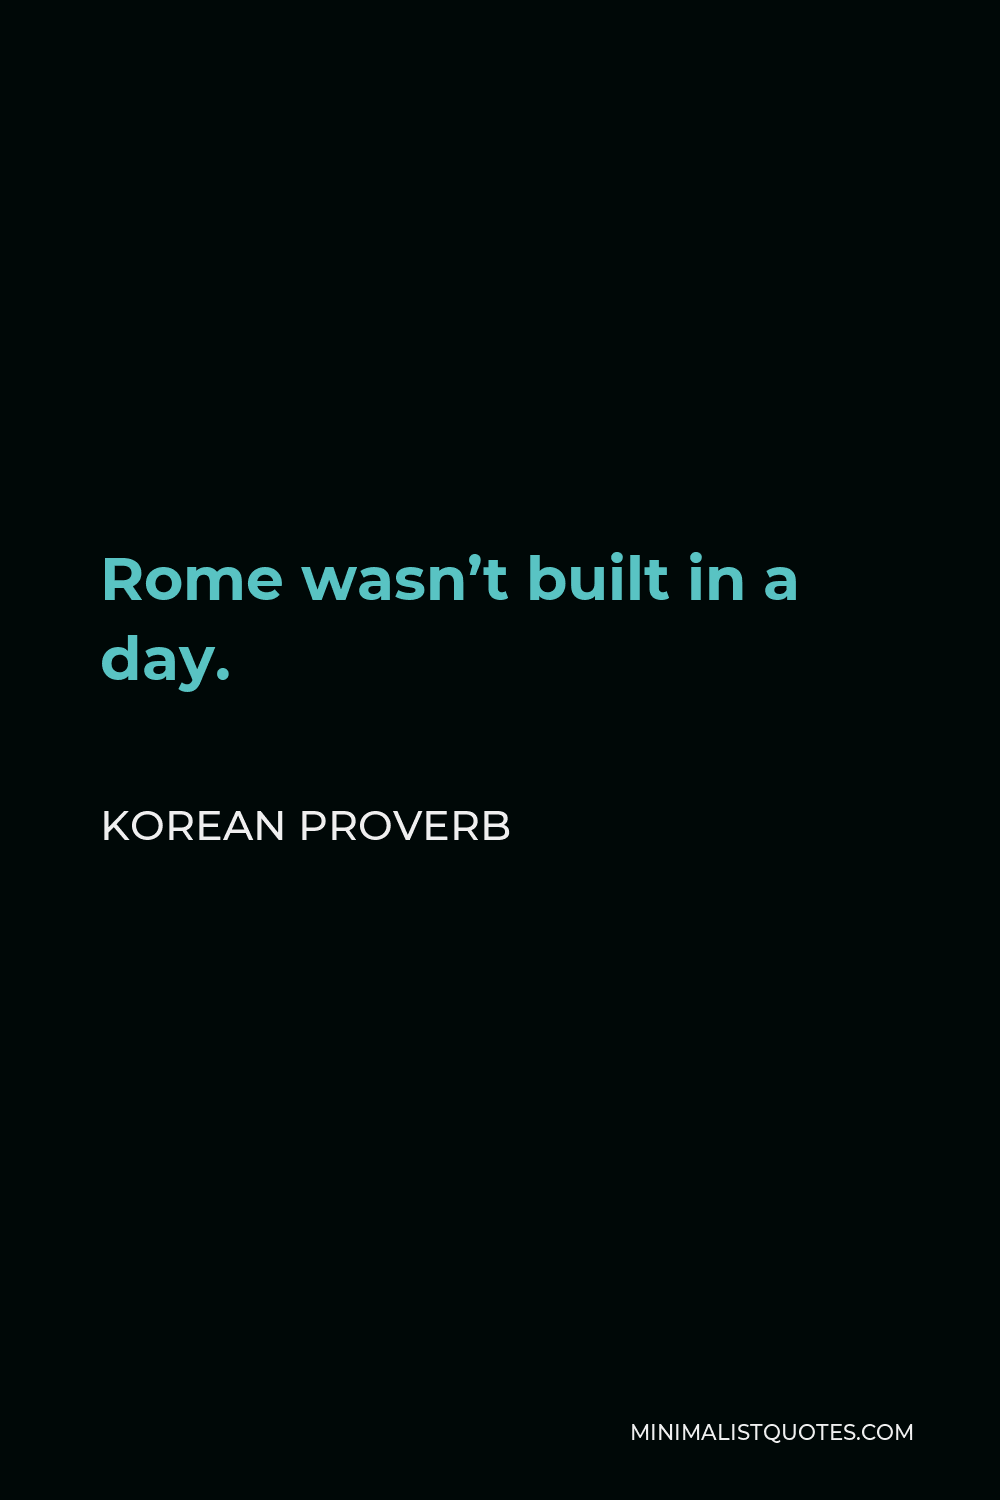 Korean Proverb Quote - Rome wasn’t built in a day.